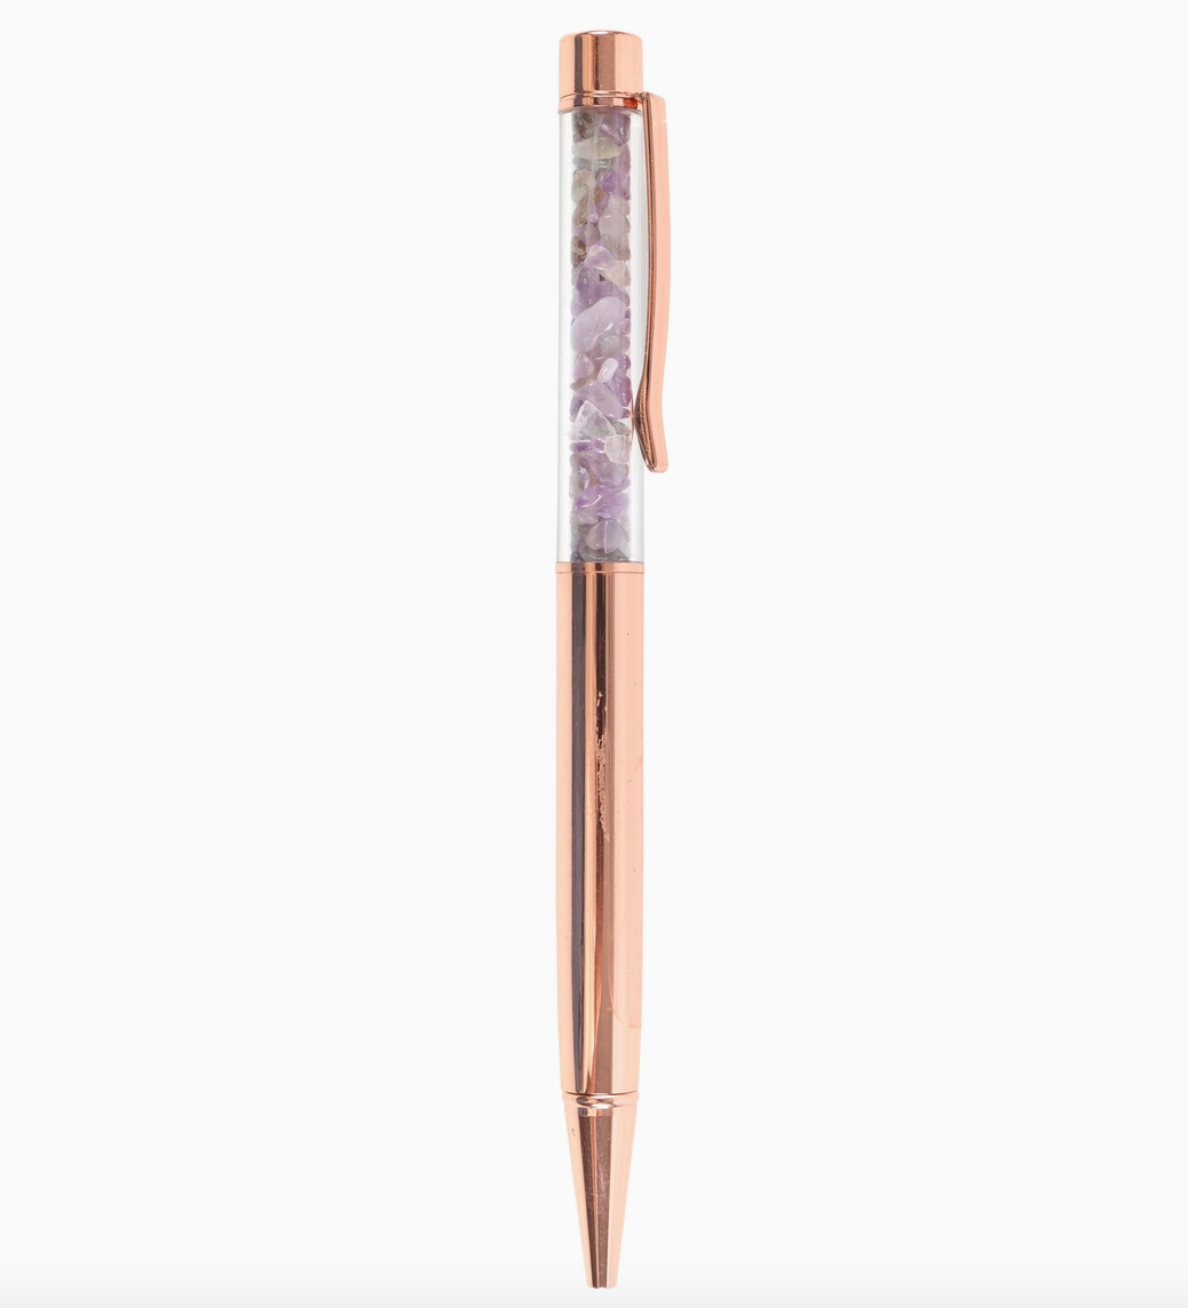 rose gold tone ball point pen with a clip and the clear top third filled with amethyst chips.